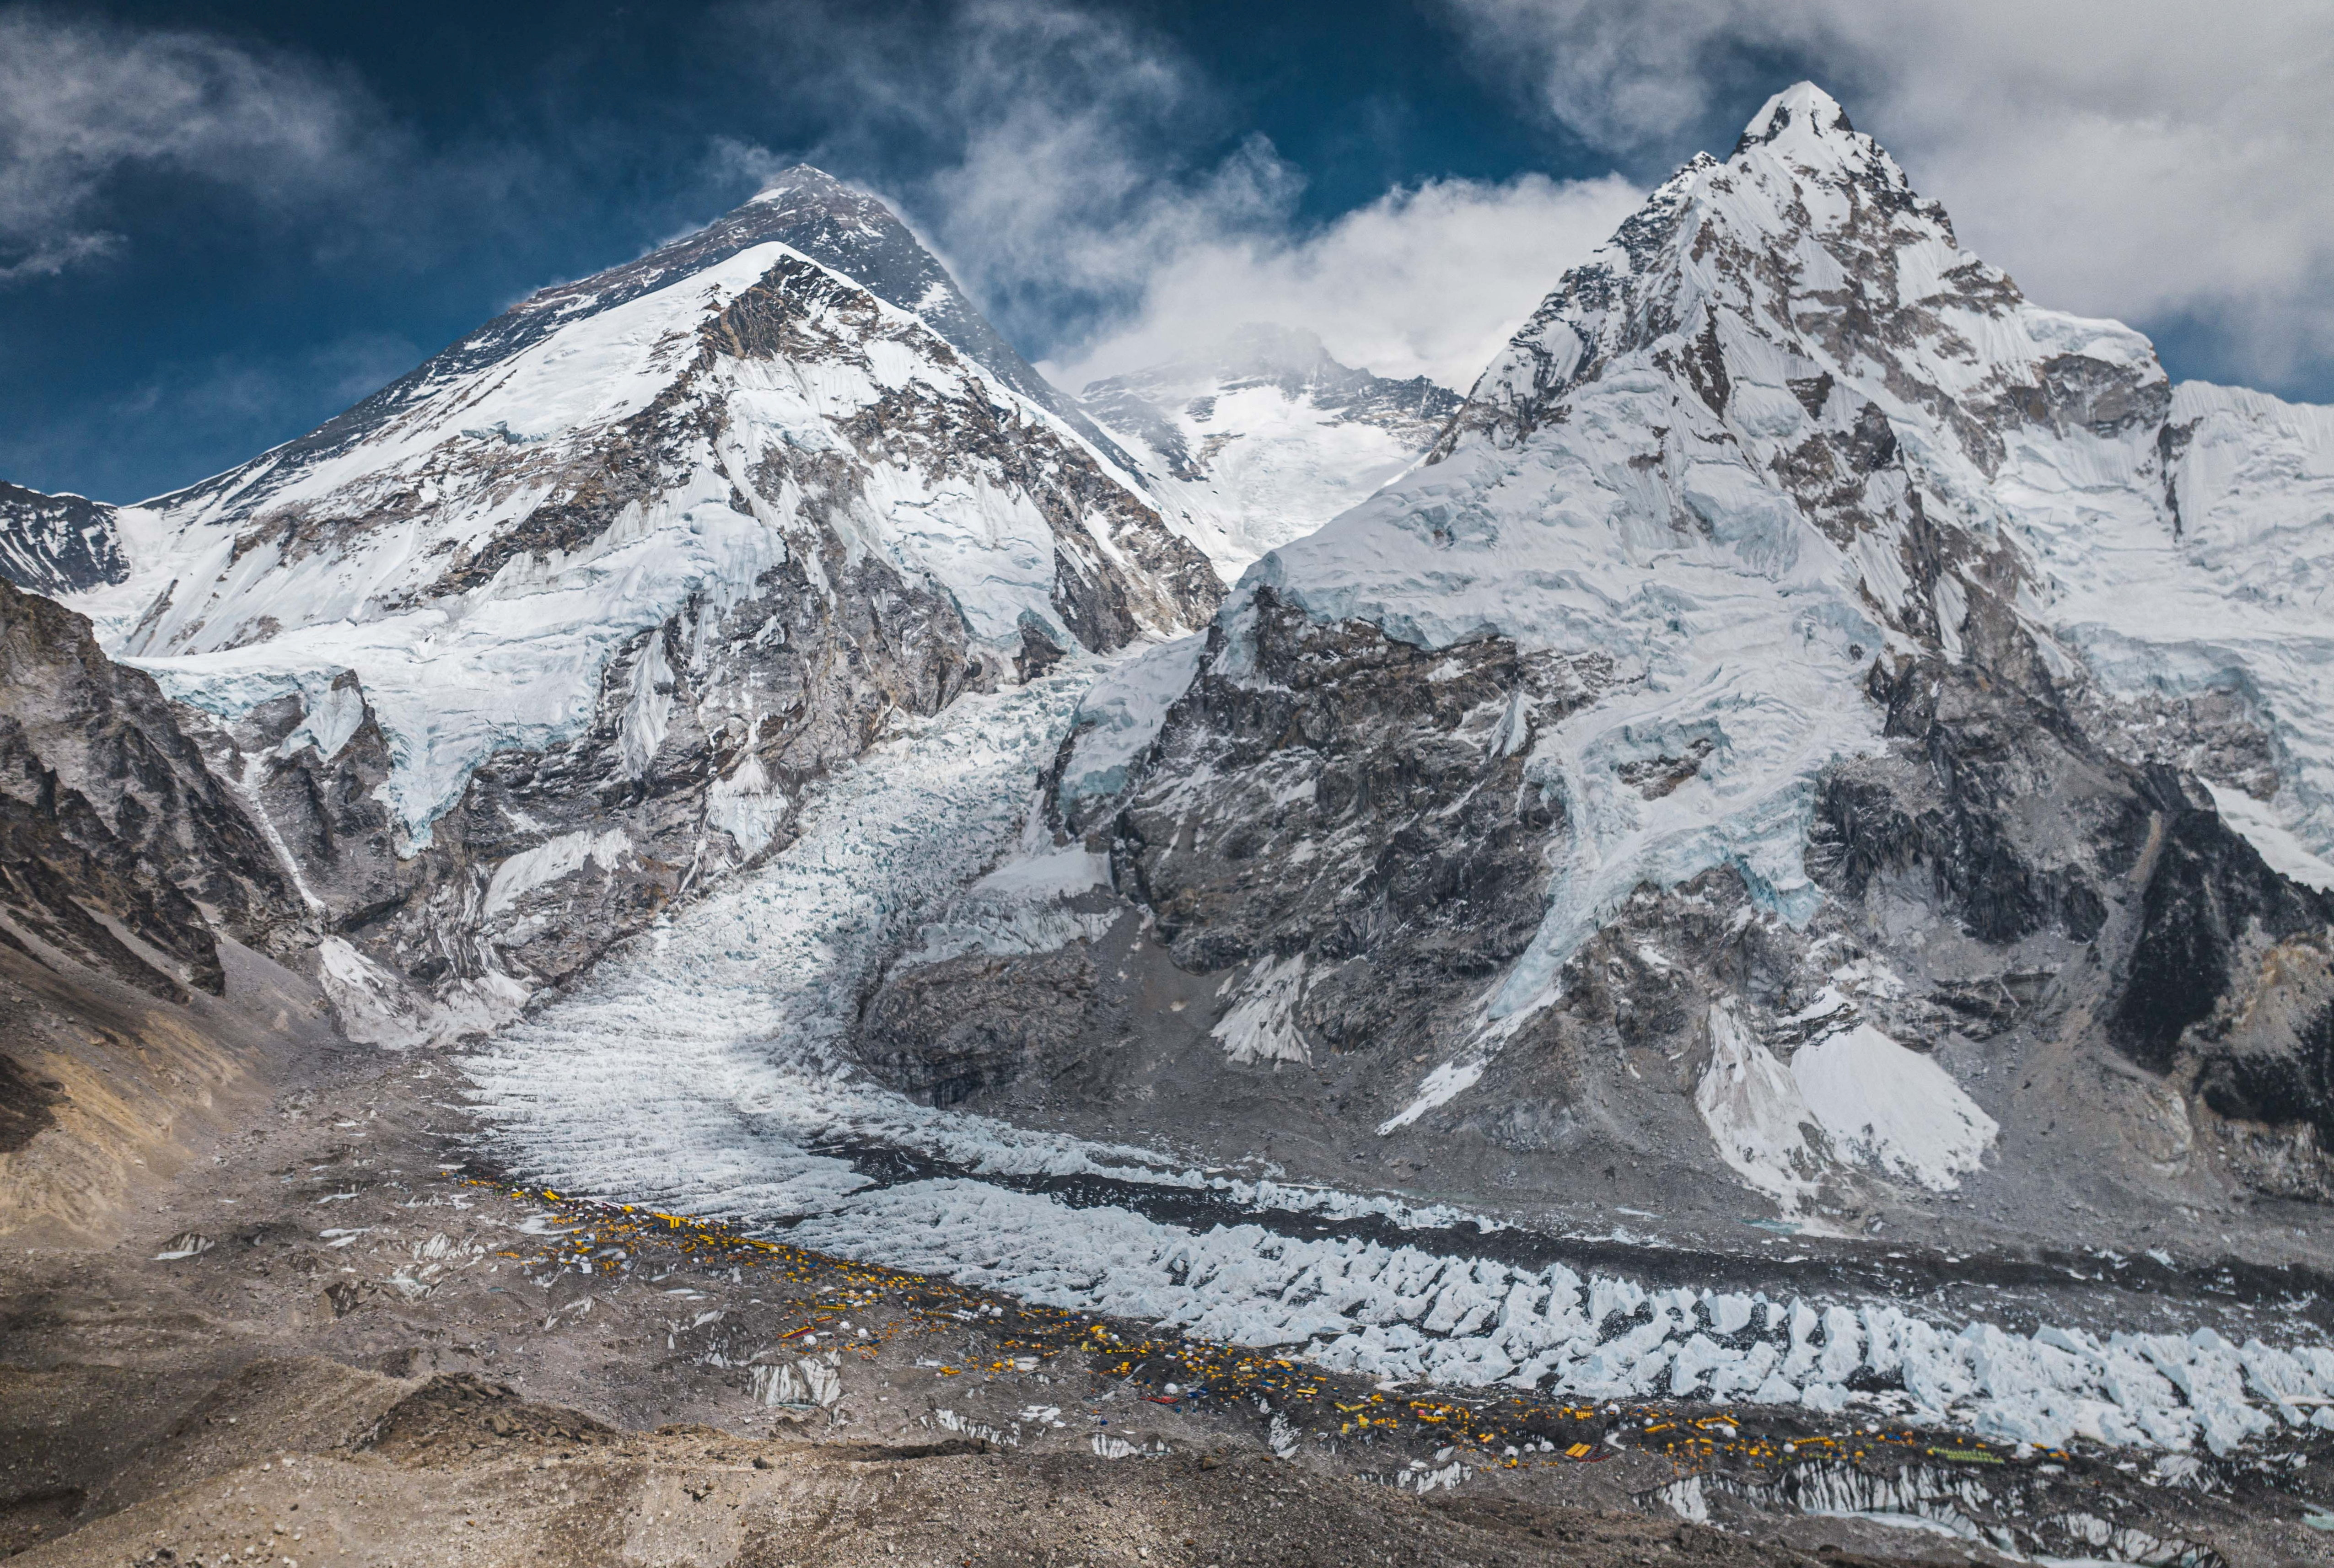 A drone view shows Mount Everest along with Khumbu Glacier and base camp in Nepal